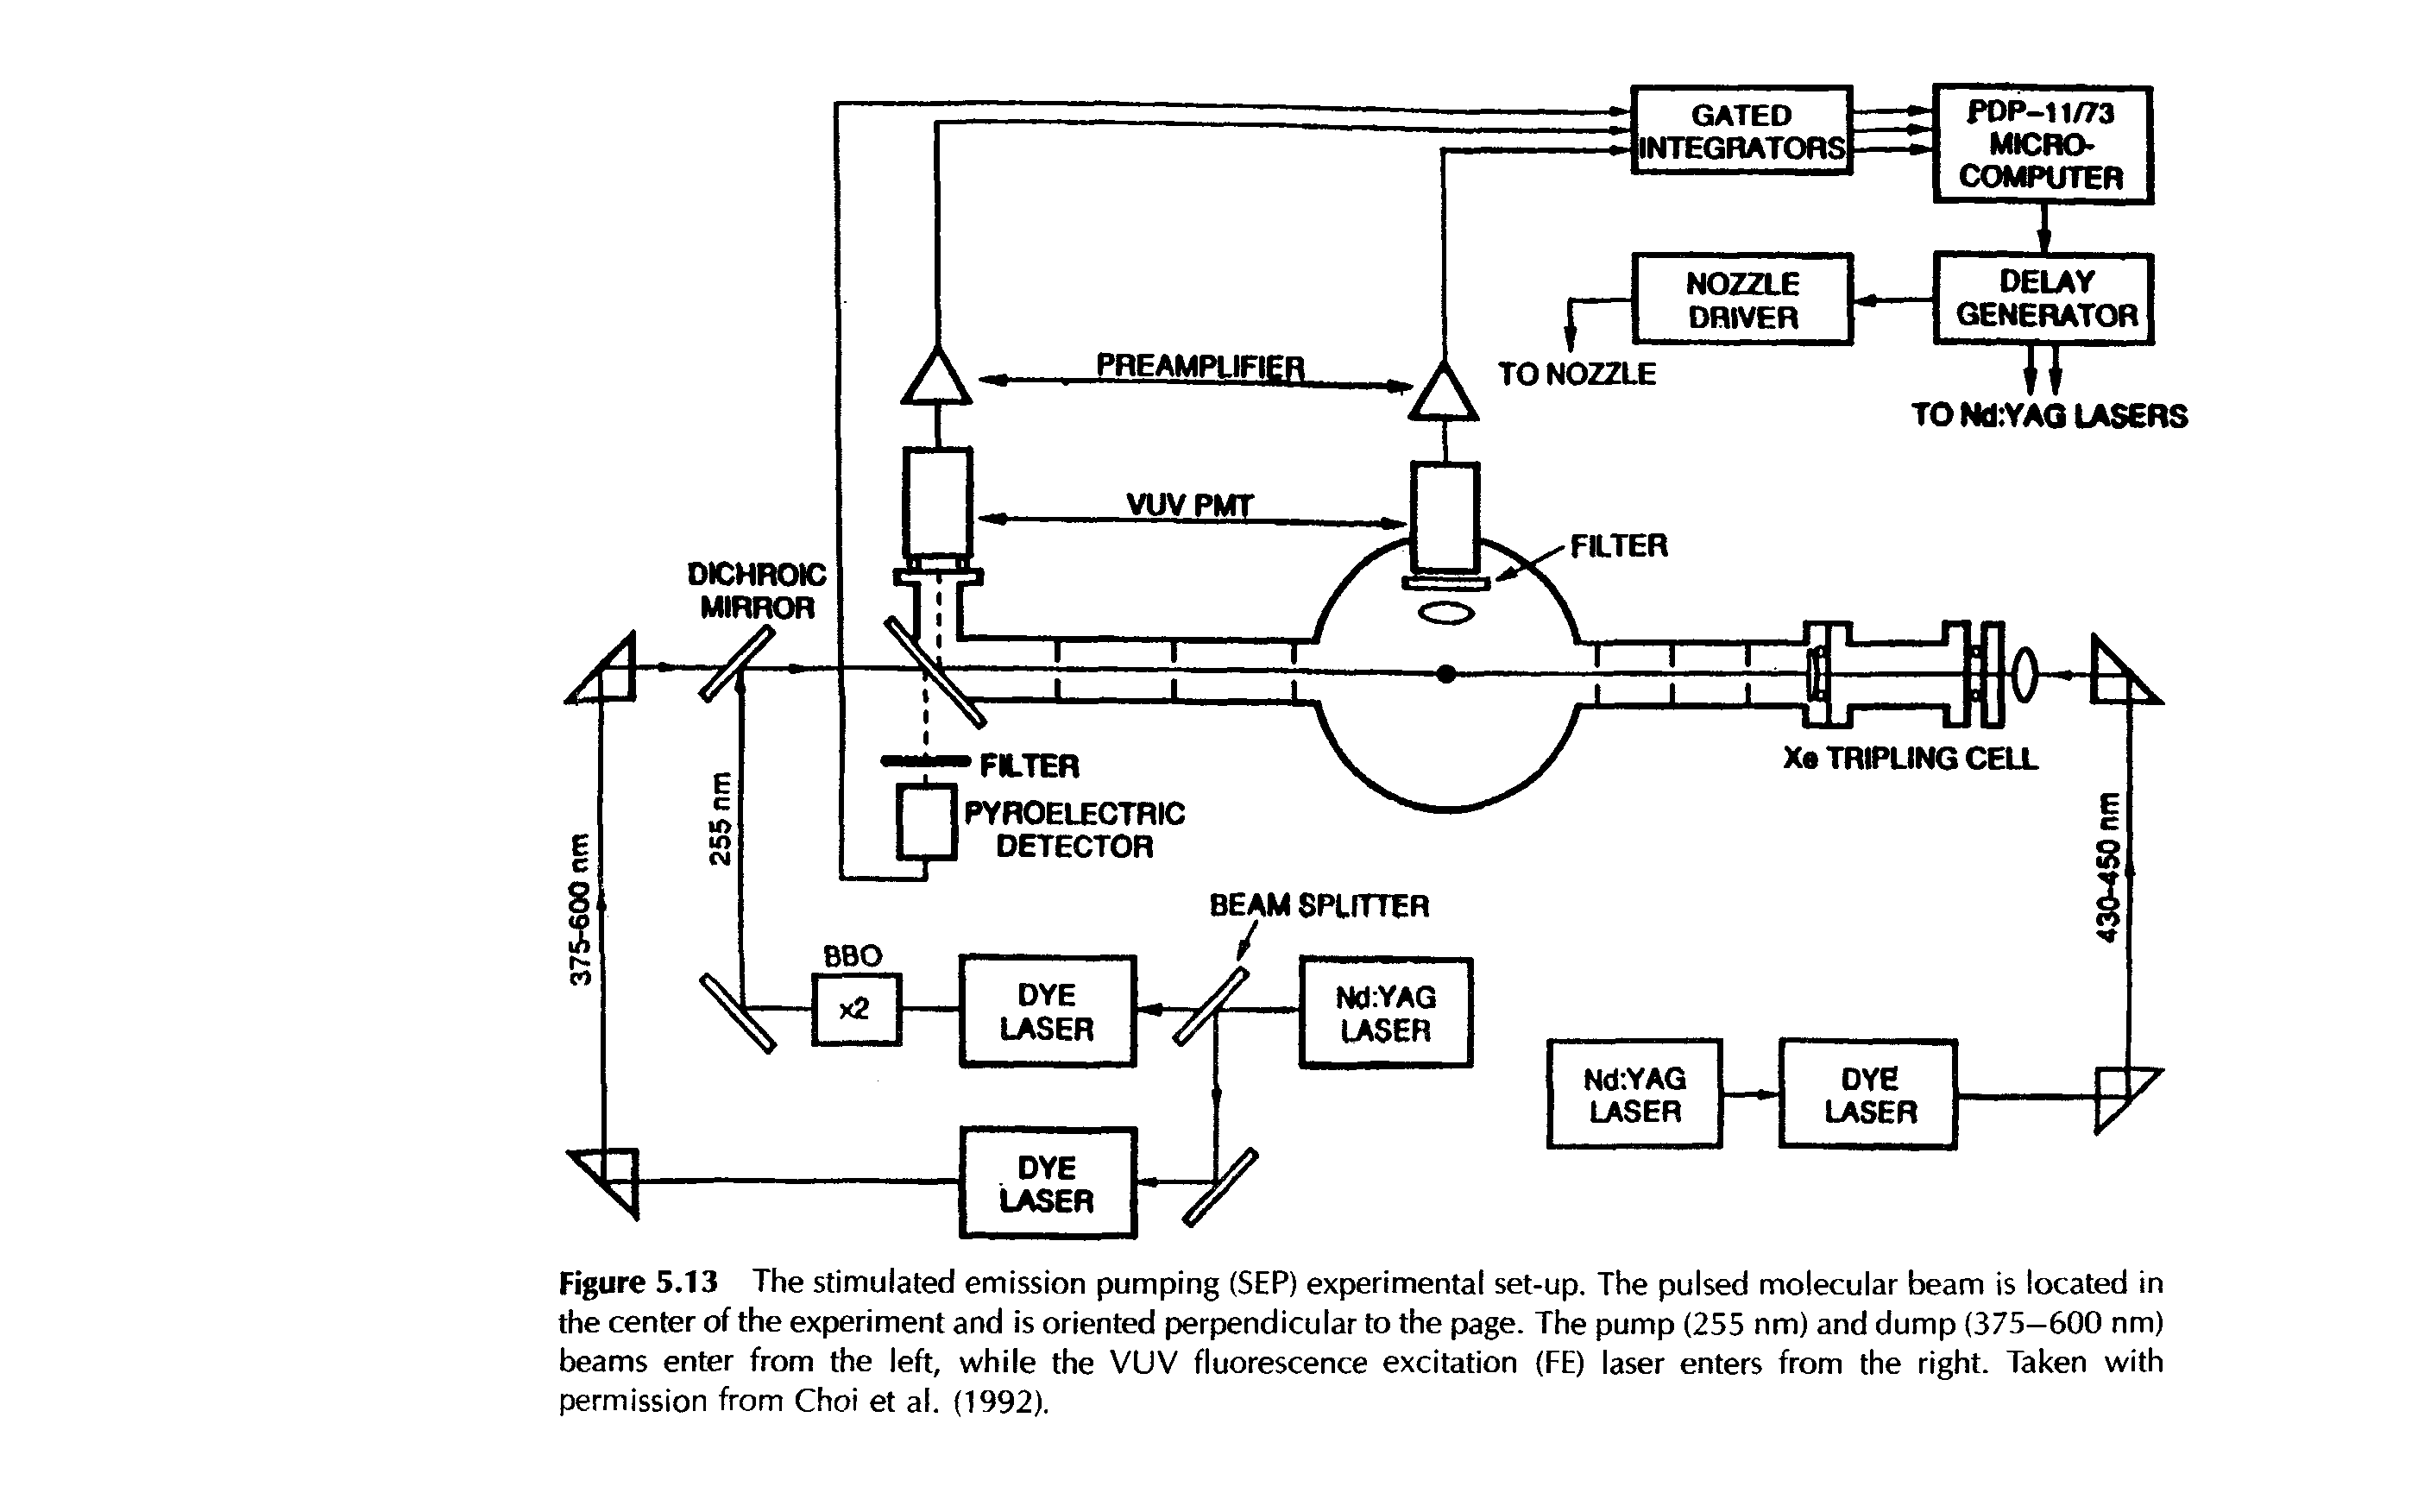 Figure 5.13 The stimulated emission pumping (SEP) experimental set-up. The pulsed molecular beam is located in the center of the experiment and is oriented perpendicular to the page. The pump (255 nm) and dump (375—600 nm) beams enter from the left, while the VUV fluorescence excitation (FE) laser enters from the right. Taken with permission from Choi et al. (1992).